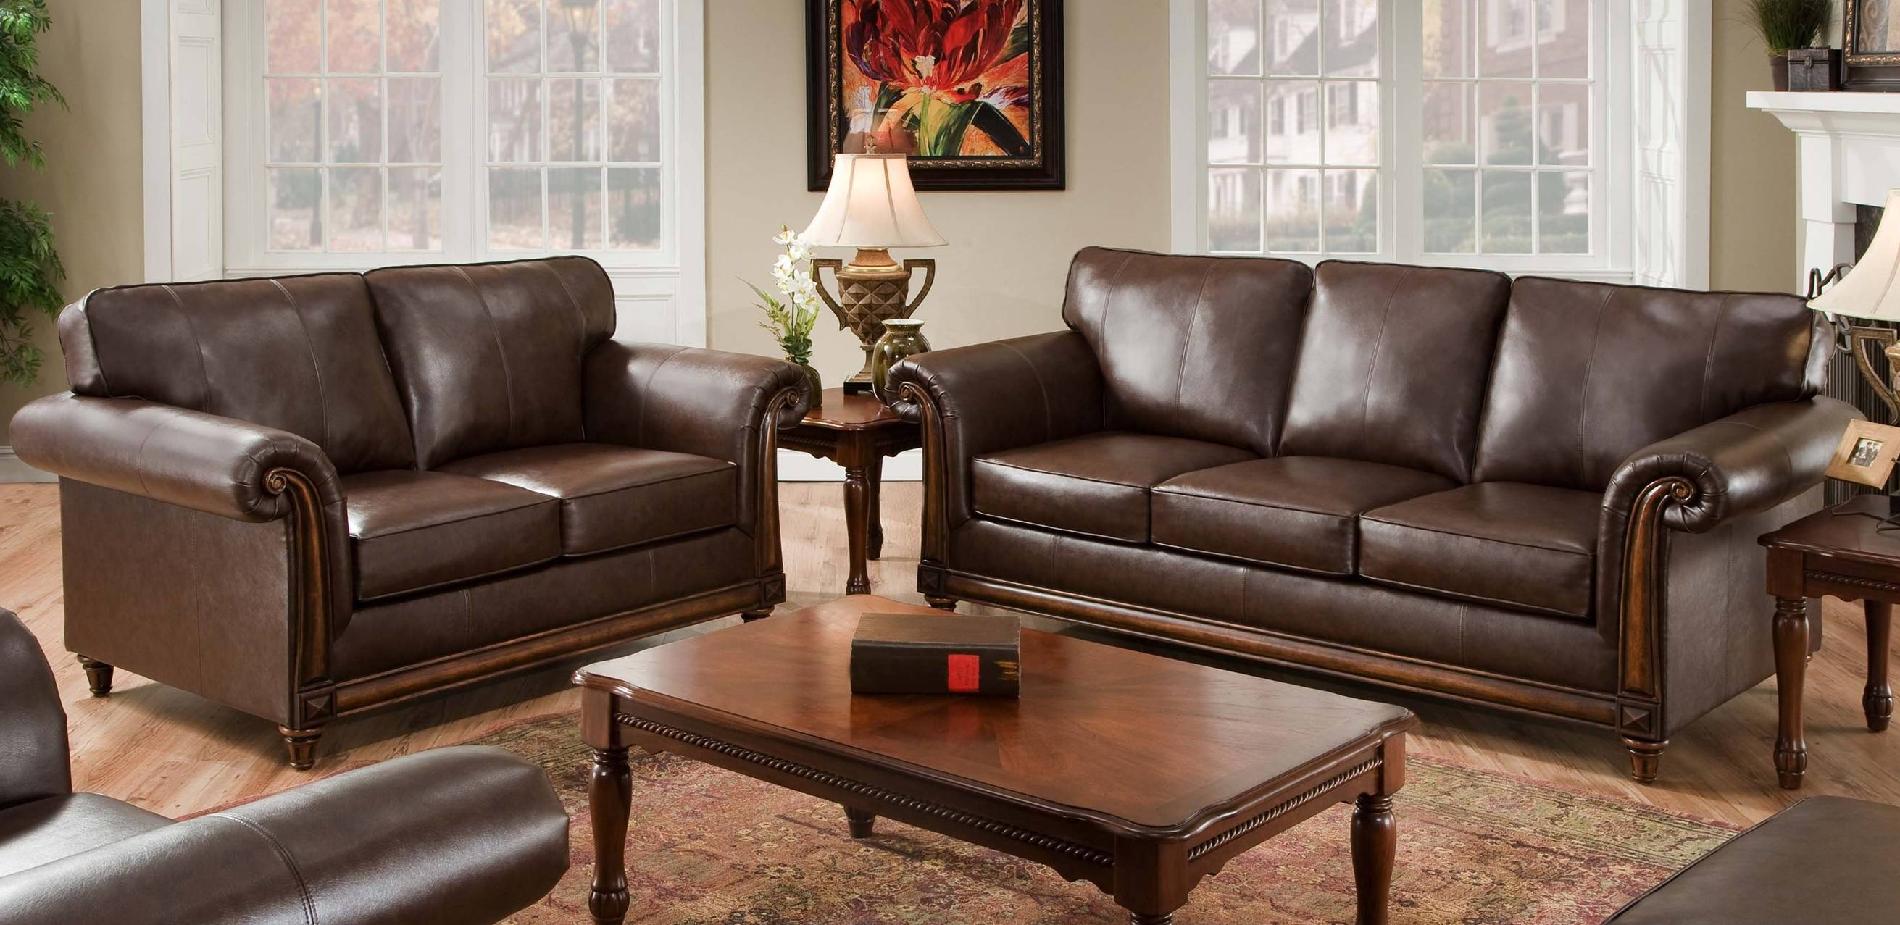 Simmons Upholstery - 8001PK - San Diego Loveseat Coffee | Sears Outlet